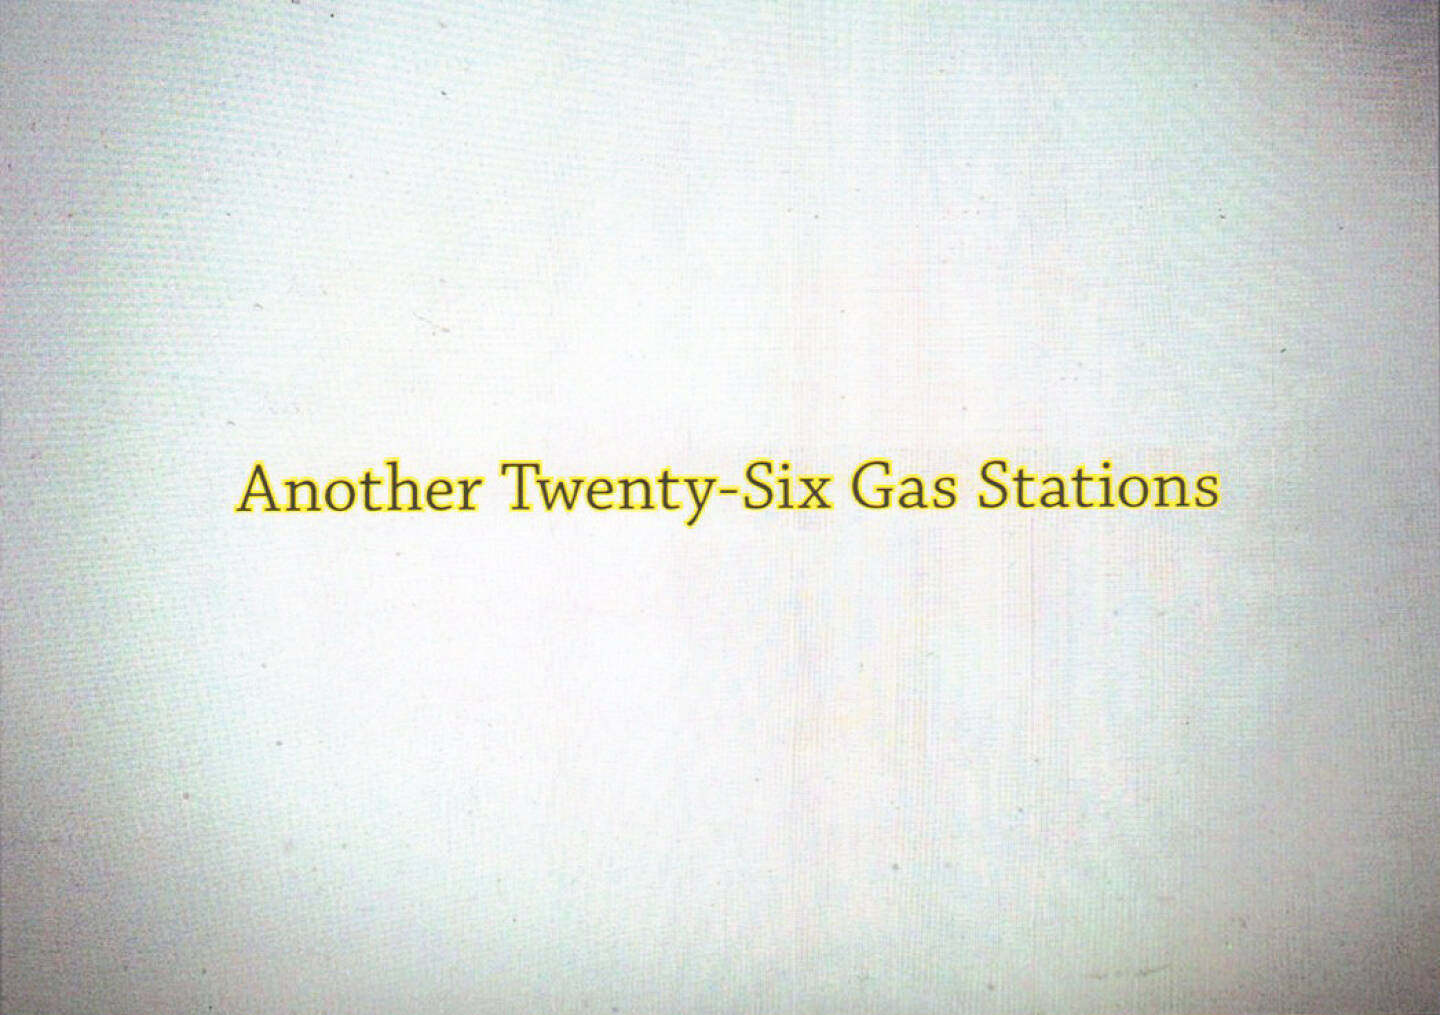 Gregory Eddi Jones - Another Twenty-Six Gas Stations, In the In-Between 2014, Cover - http://josefchladek.com/book/gregory_eddi_jones_-_another_twenty-six_gas_stations